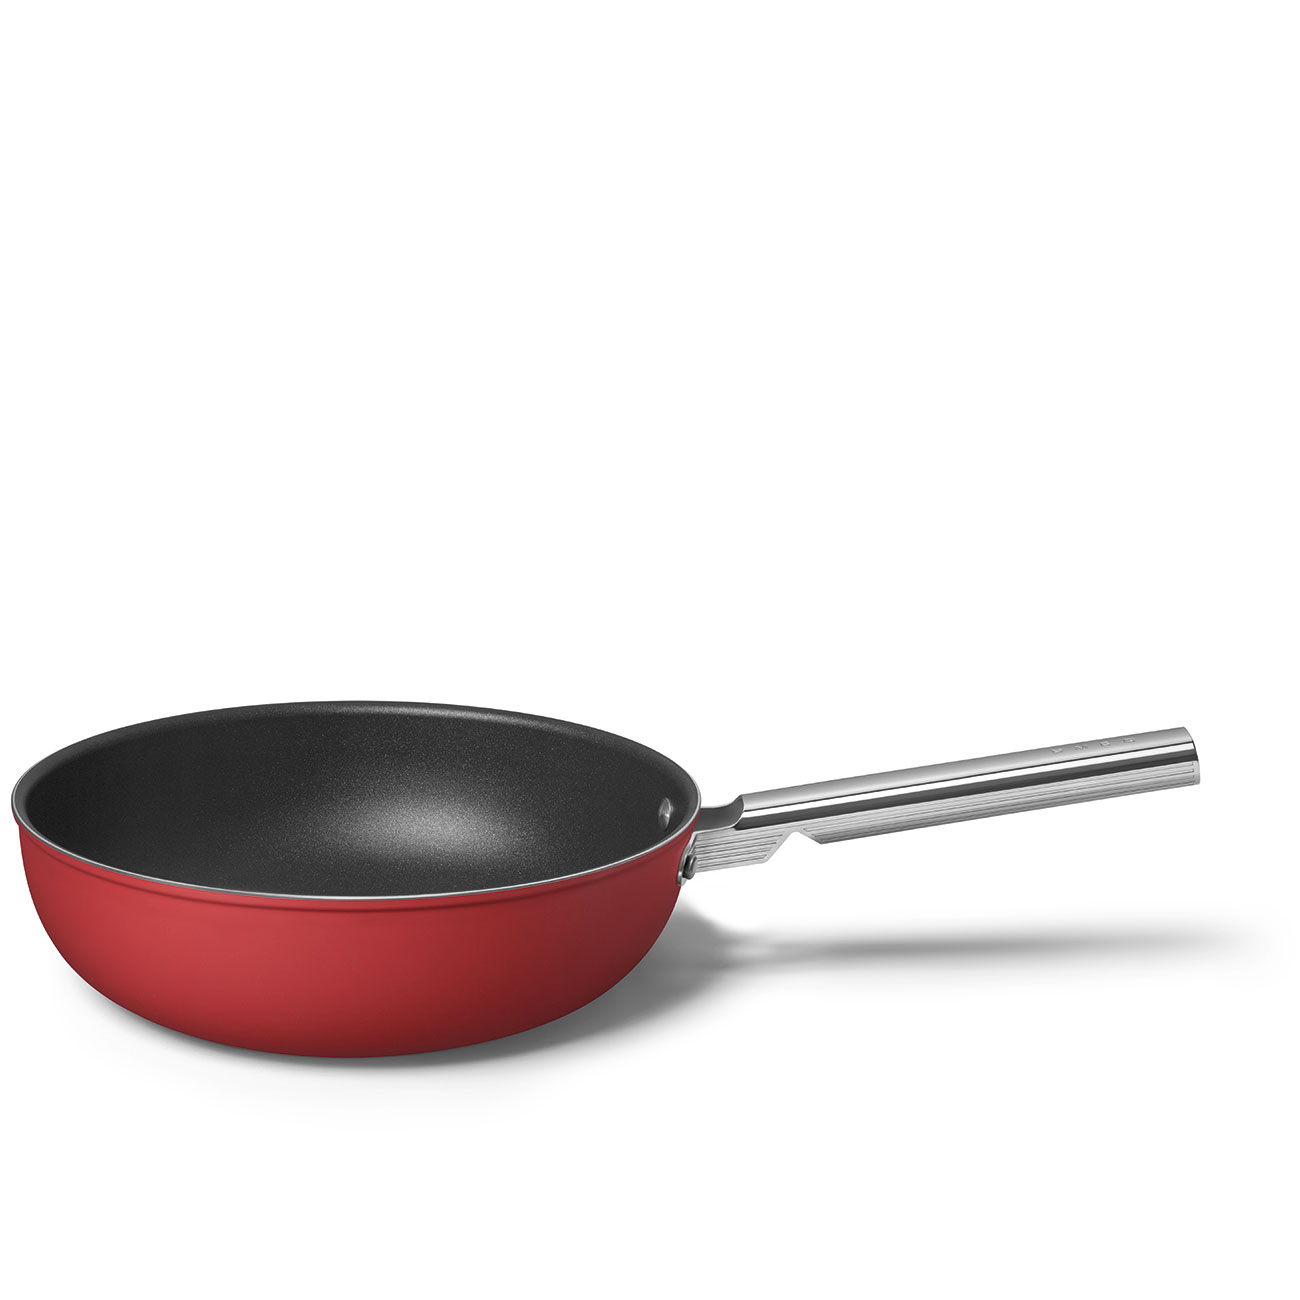 Smeg Red Non-stick Wok with Stainless Steel Handle - CKFW3001RDM_2